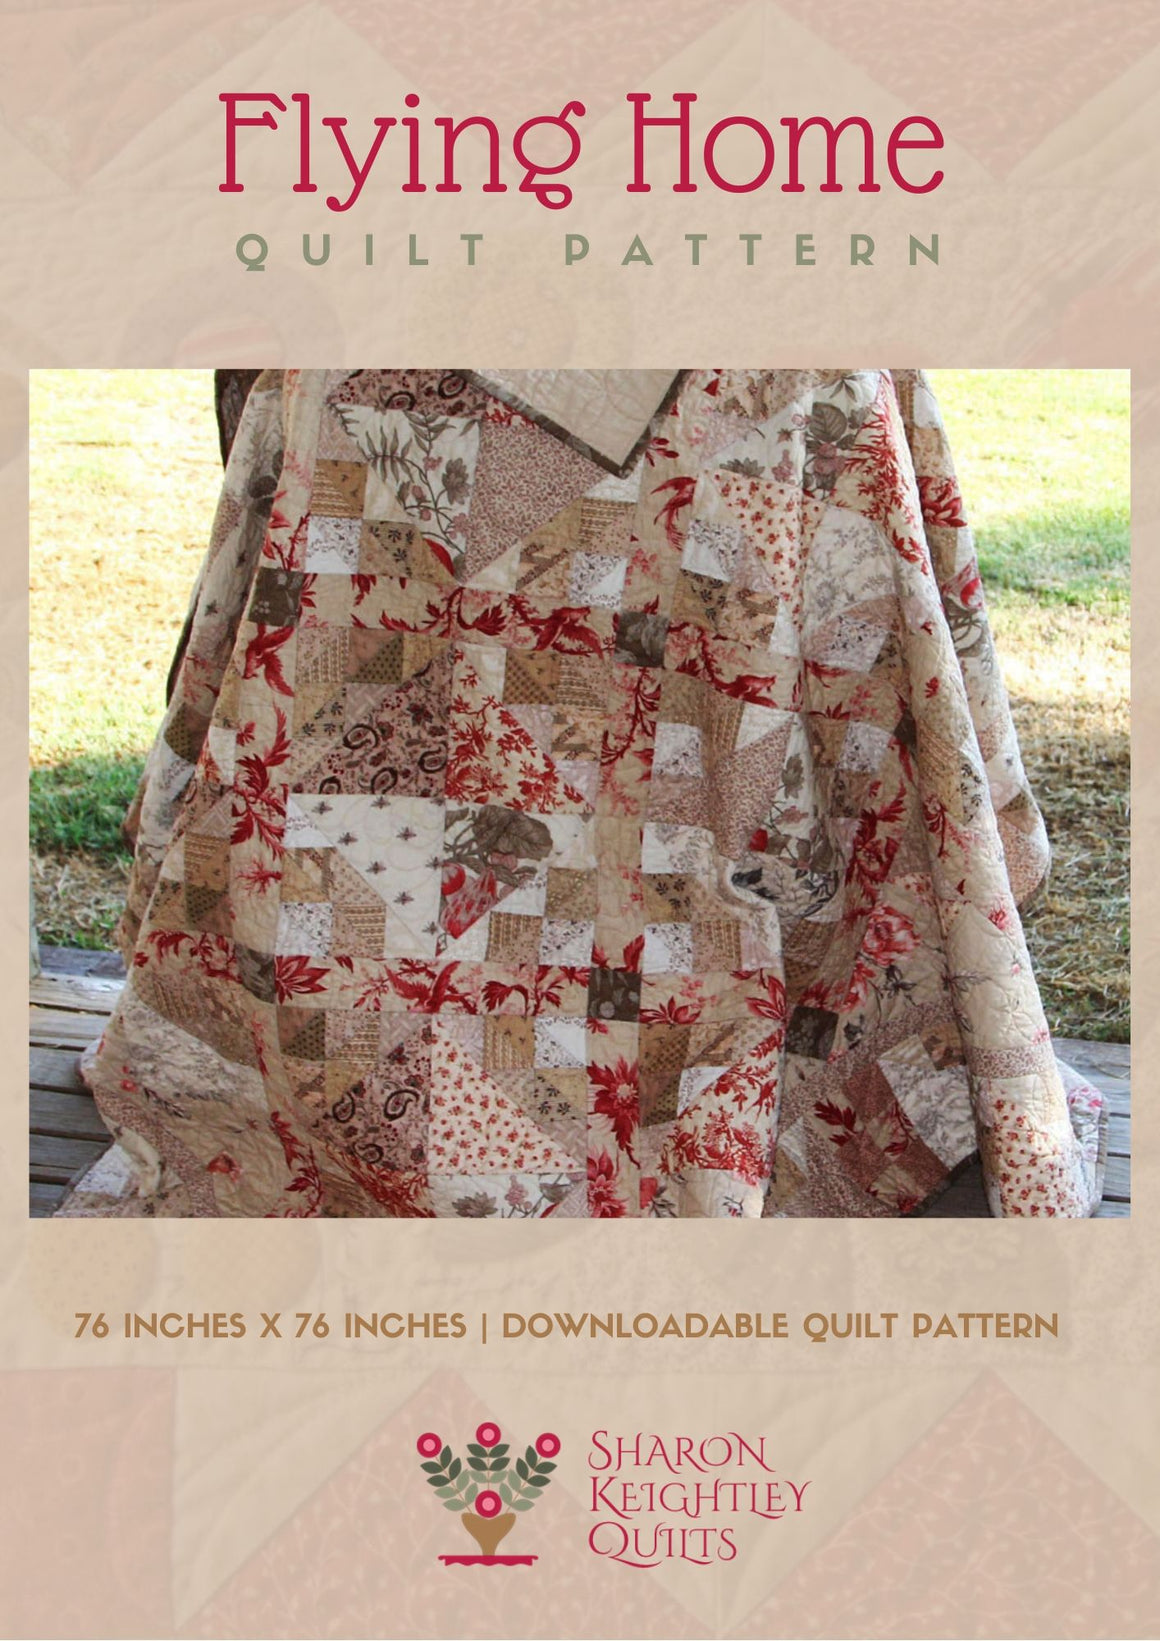 Flying Home Quilt Pattern - Pine Valley Quilts